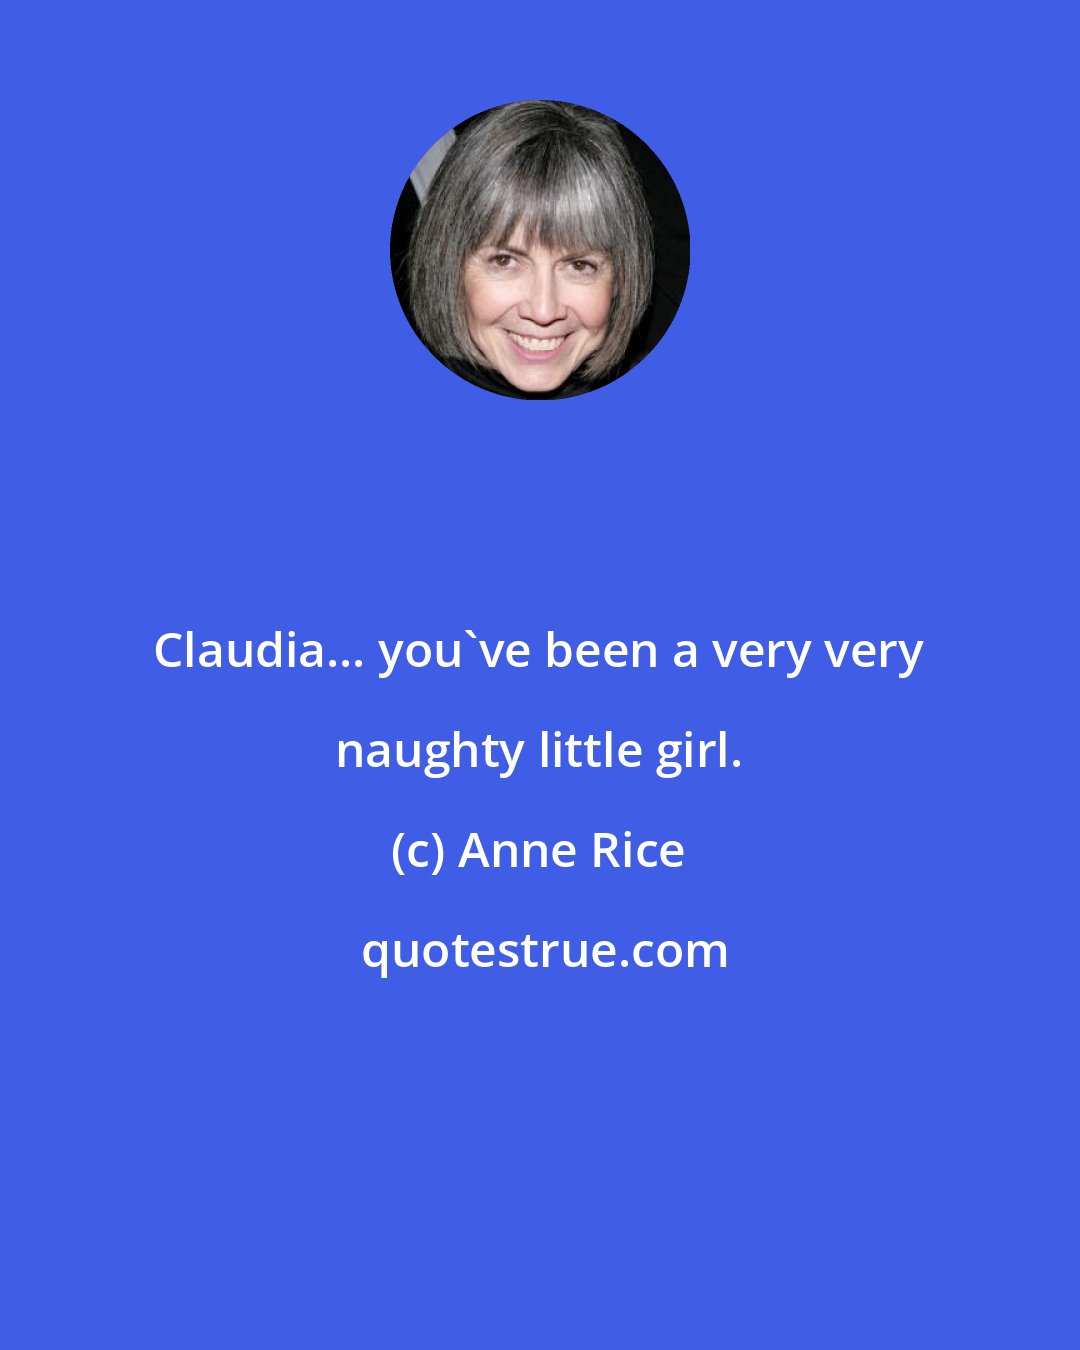 Anne Rice: Claudia... you've been a very very naughty little girl.